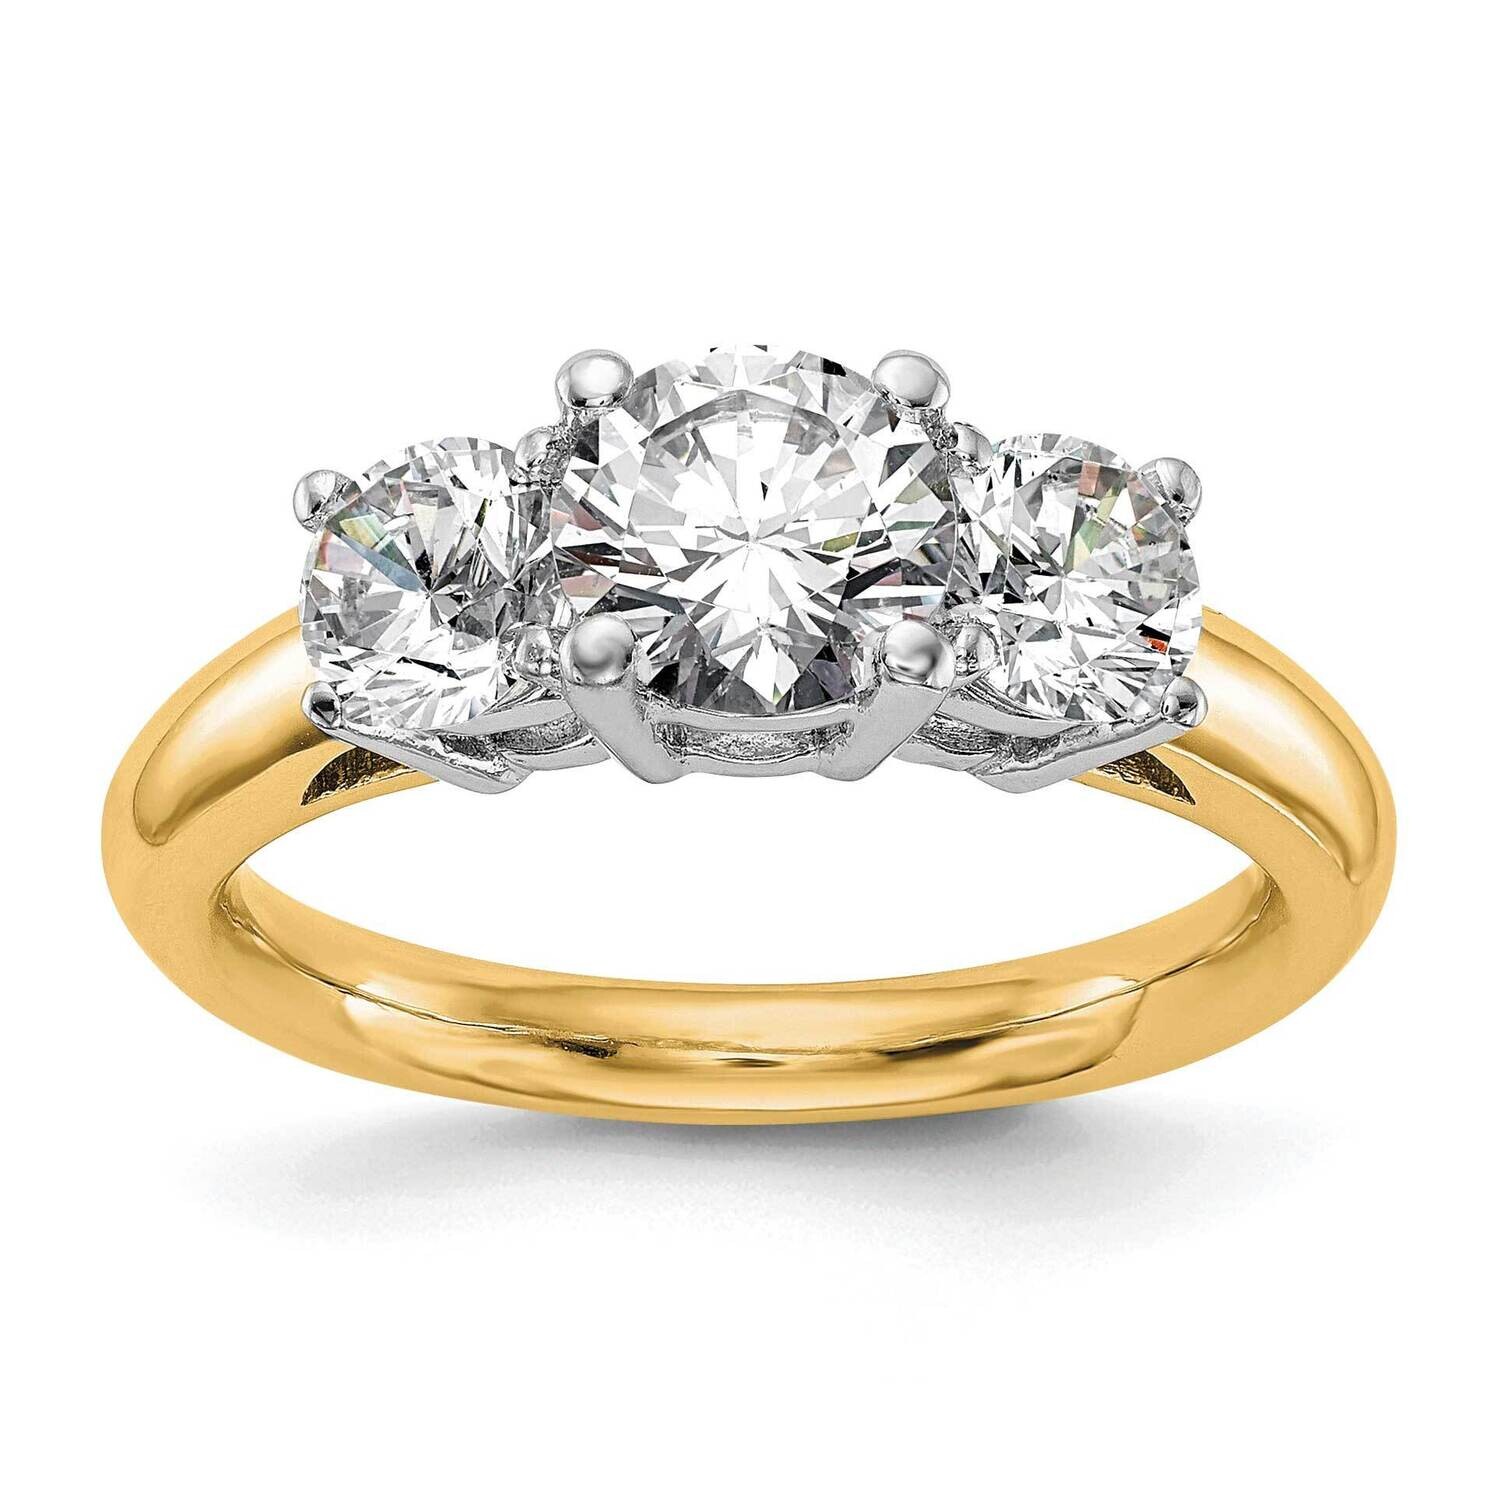 3-Stone Holds 1 Carat 6.5mm Round Center 2-5.2mm Round Sides Engagement Ring Mounting 14k Two-Tone Gold RM2950E-100-CYWAA